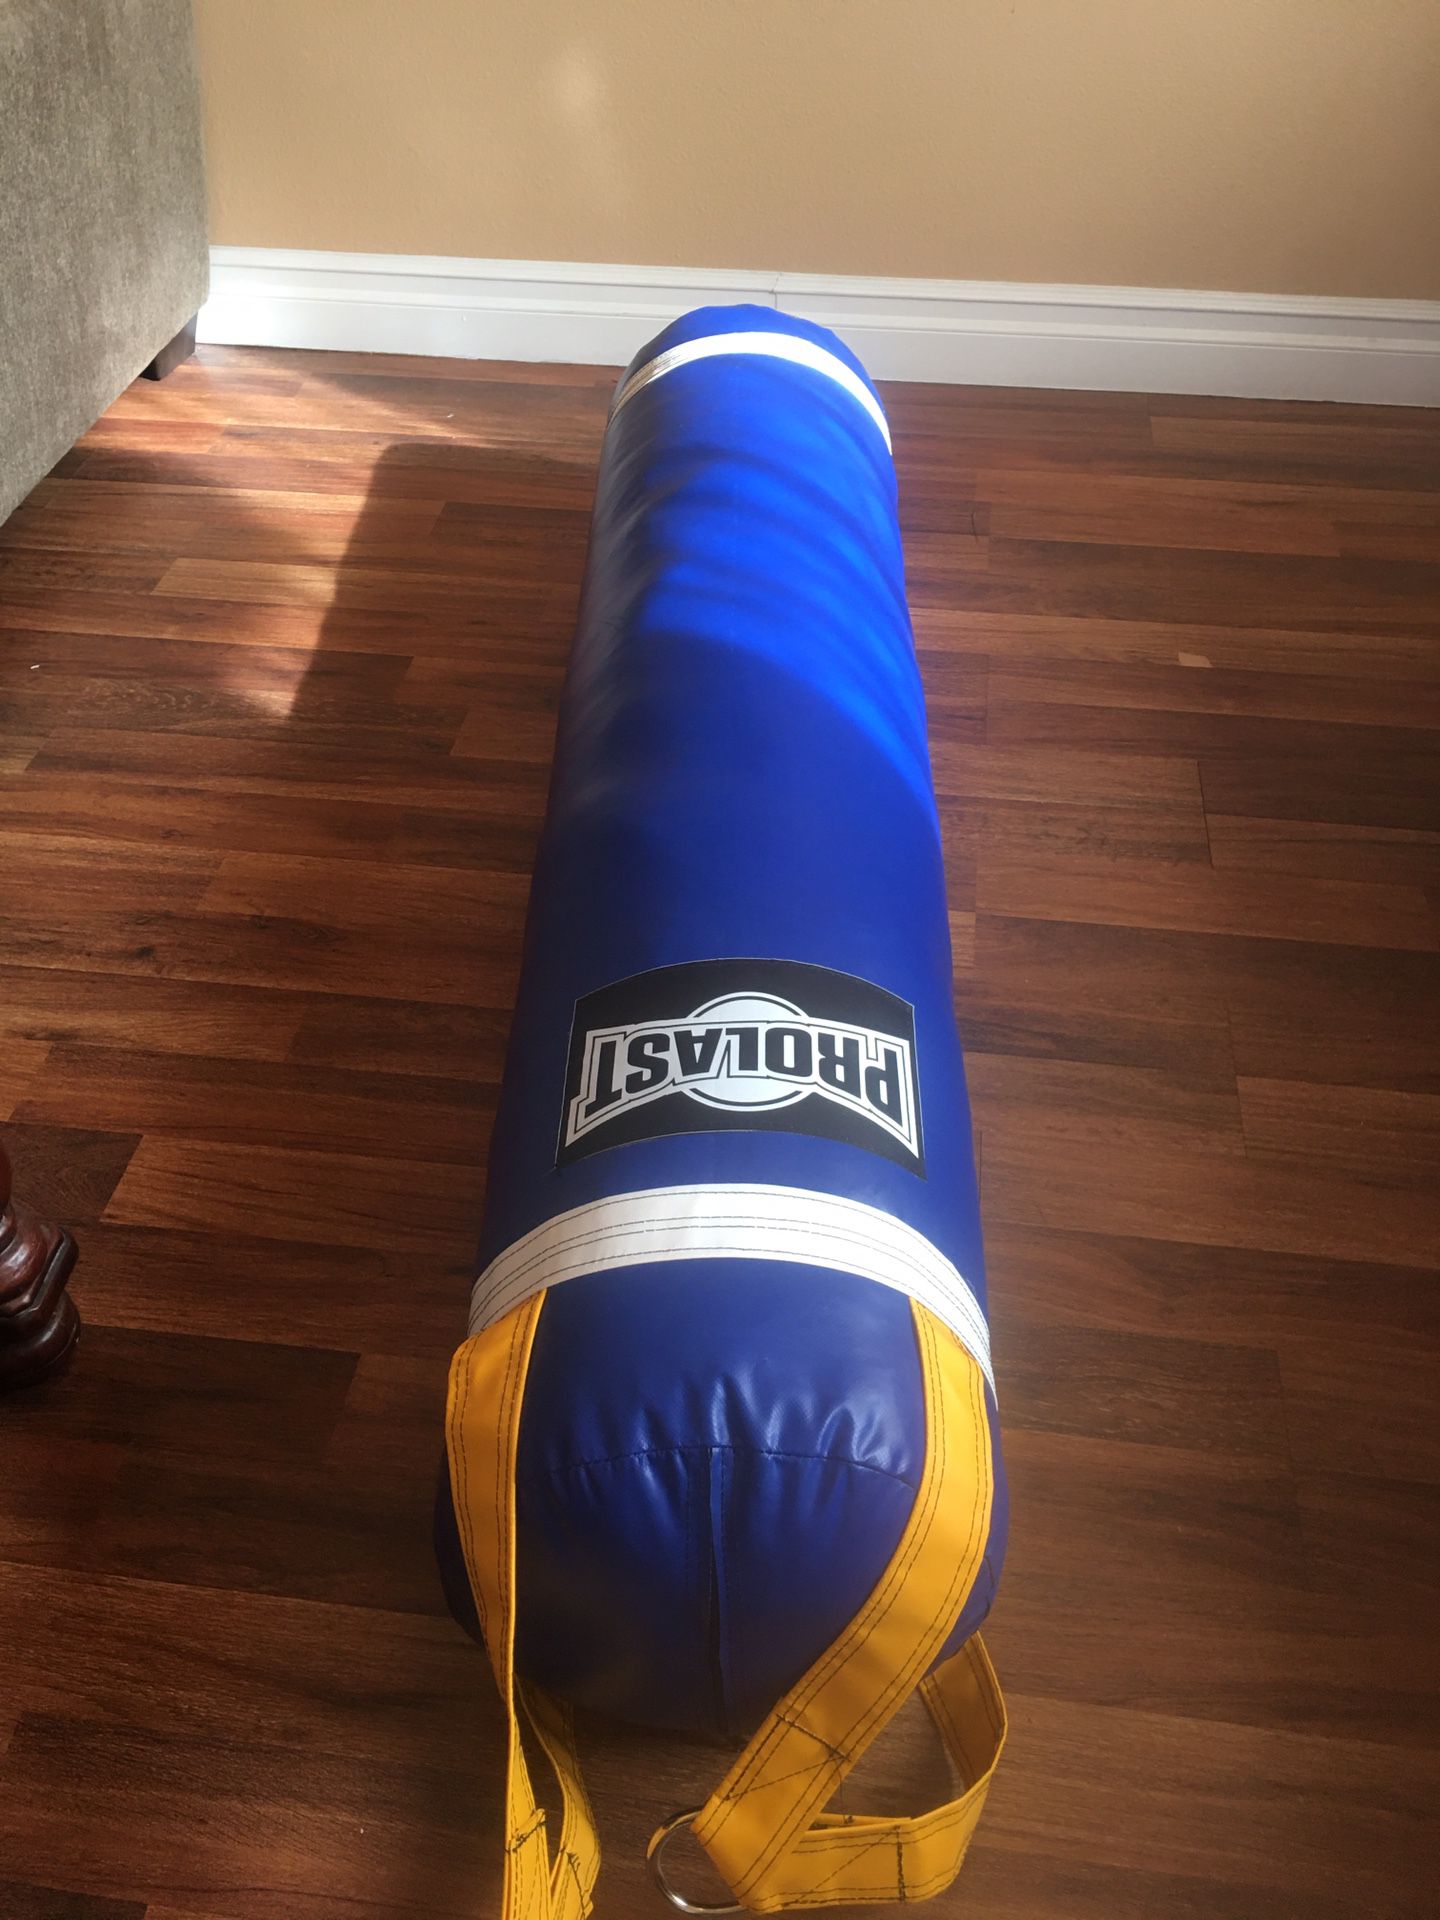 PUNCHING BAG BRAND NEW 100 POUNDS FILLED LUXURY ABOUT FIVE FEET TALL MADE USA 🇺🇸 